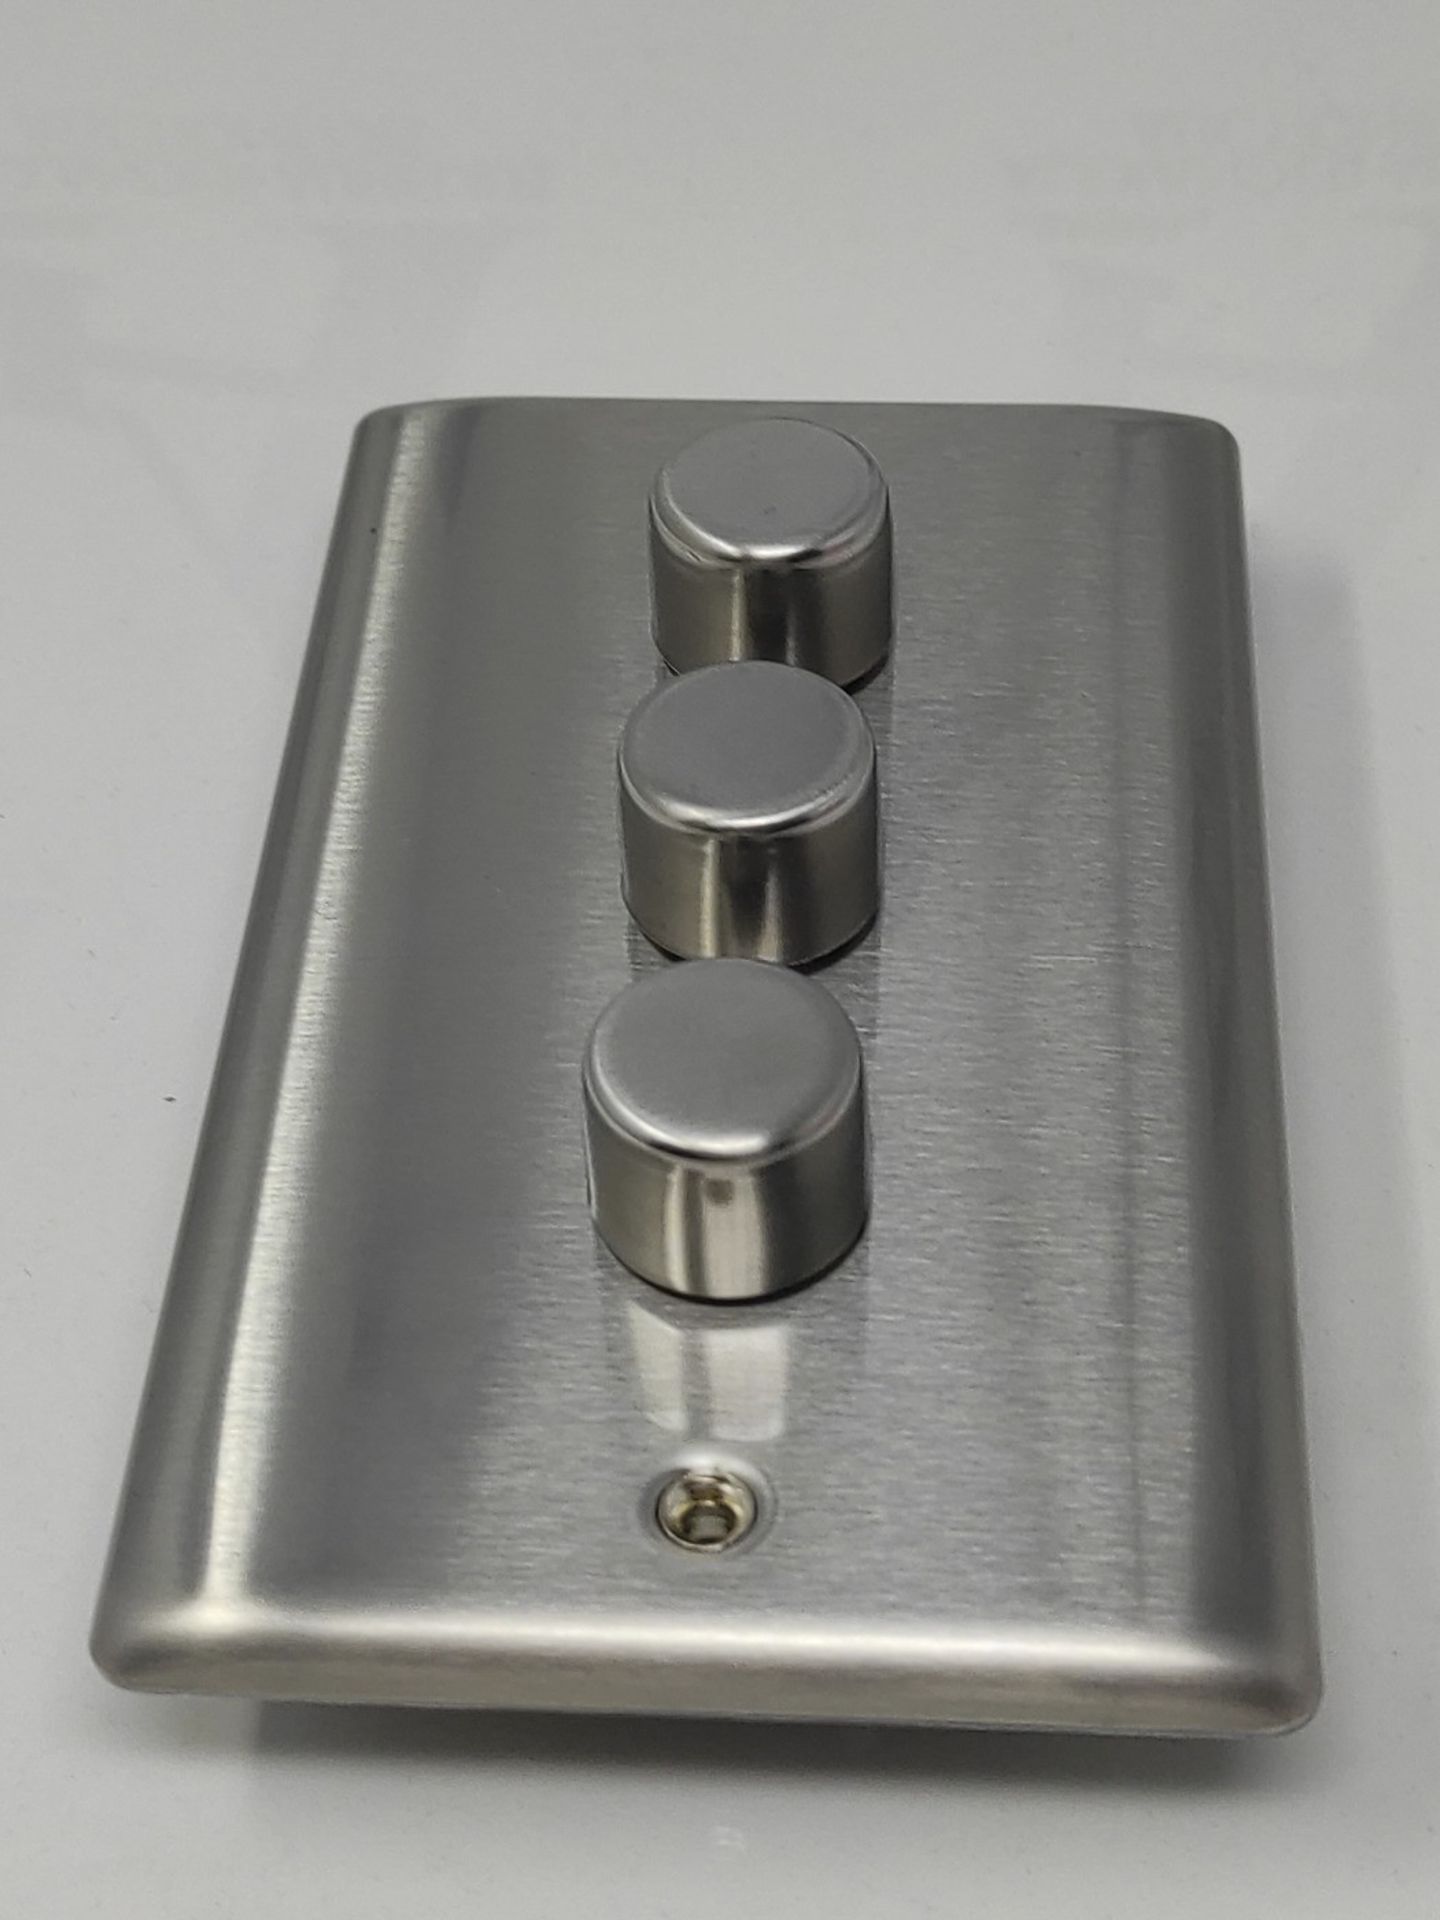 BG Electrical NBS83-01 BRUSHED STEEL 200W TRIPLE DIMMER SWITCH, 2-WAY PUSH ON/OFF, TRA - Image 2 of 3